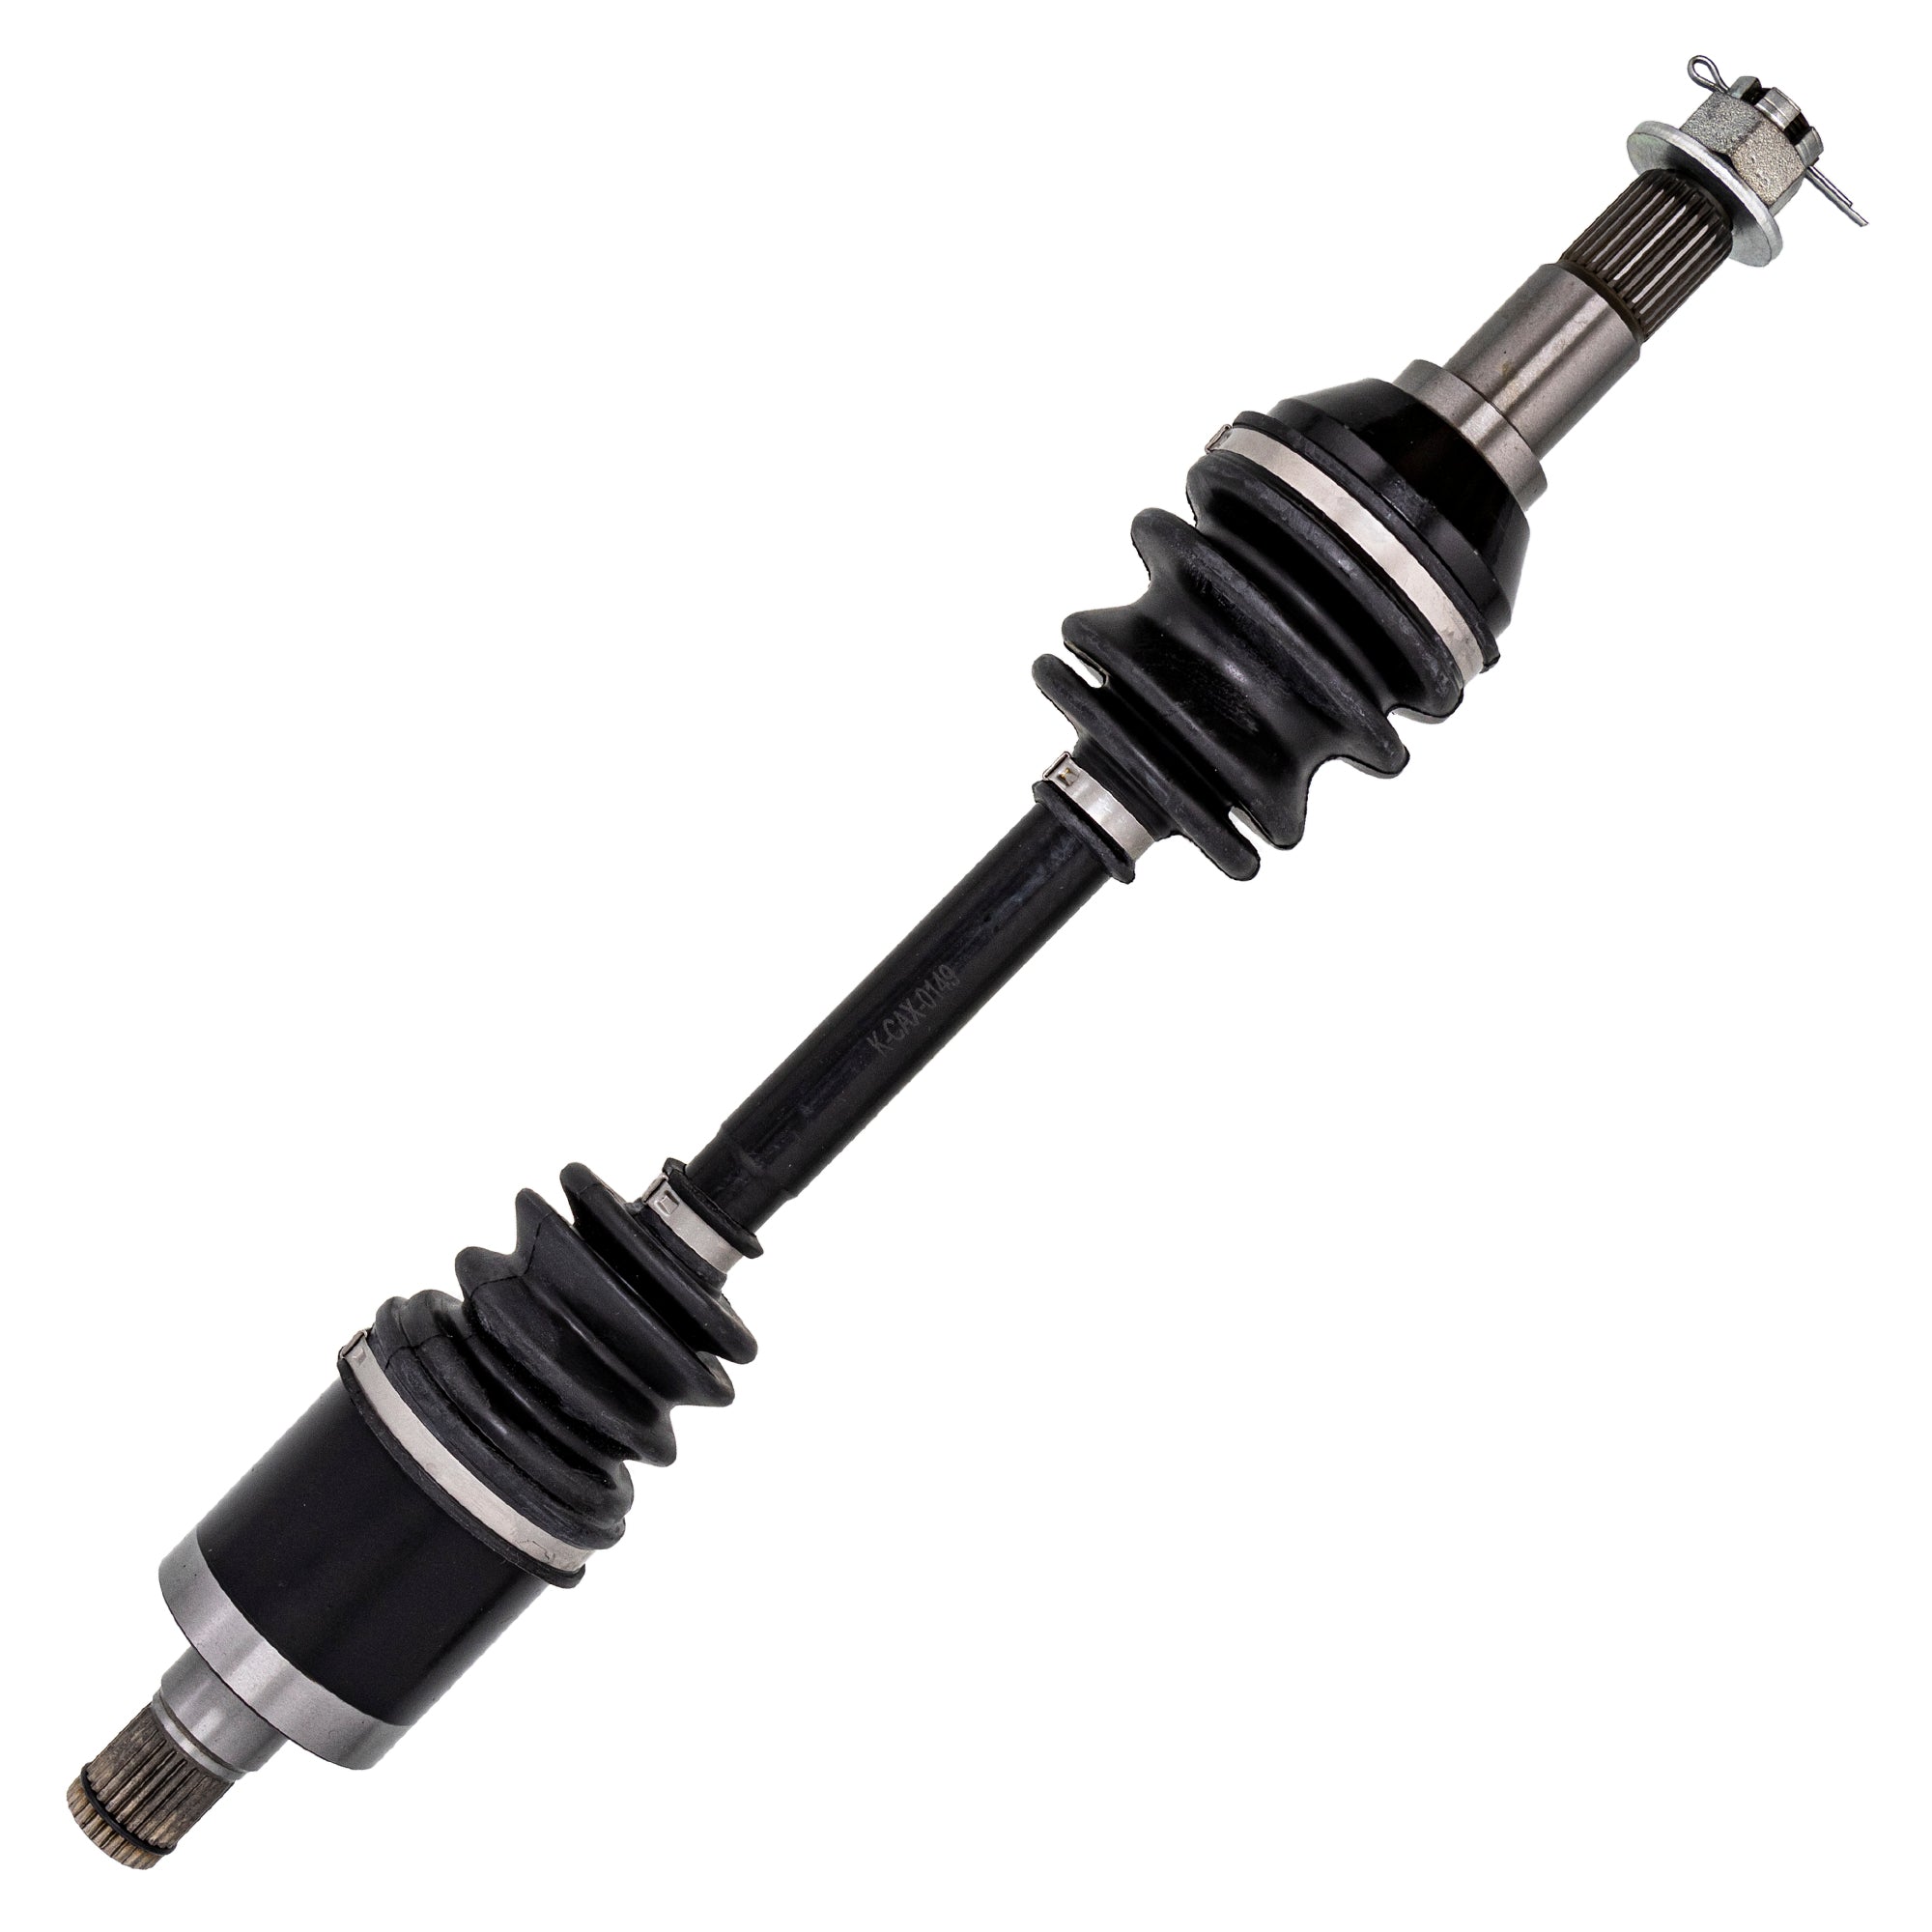 Complete F&R CV Axle Driveshaft Kit for Can-Am Outlander 450 570 Max